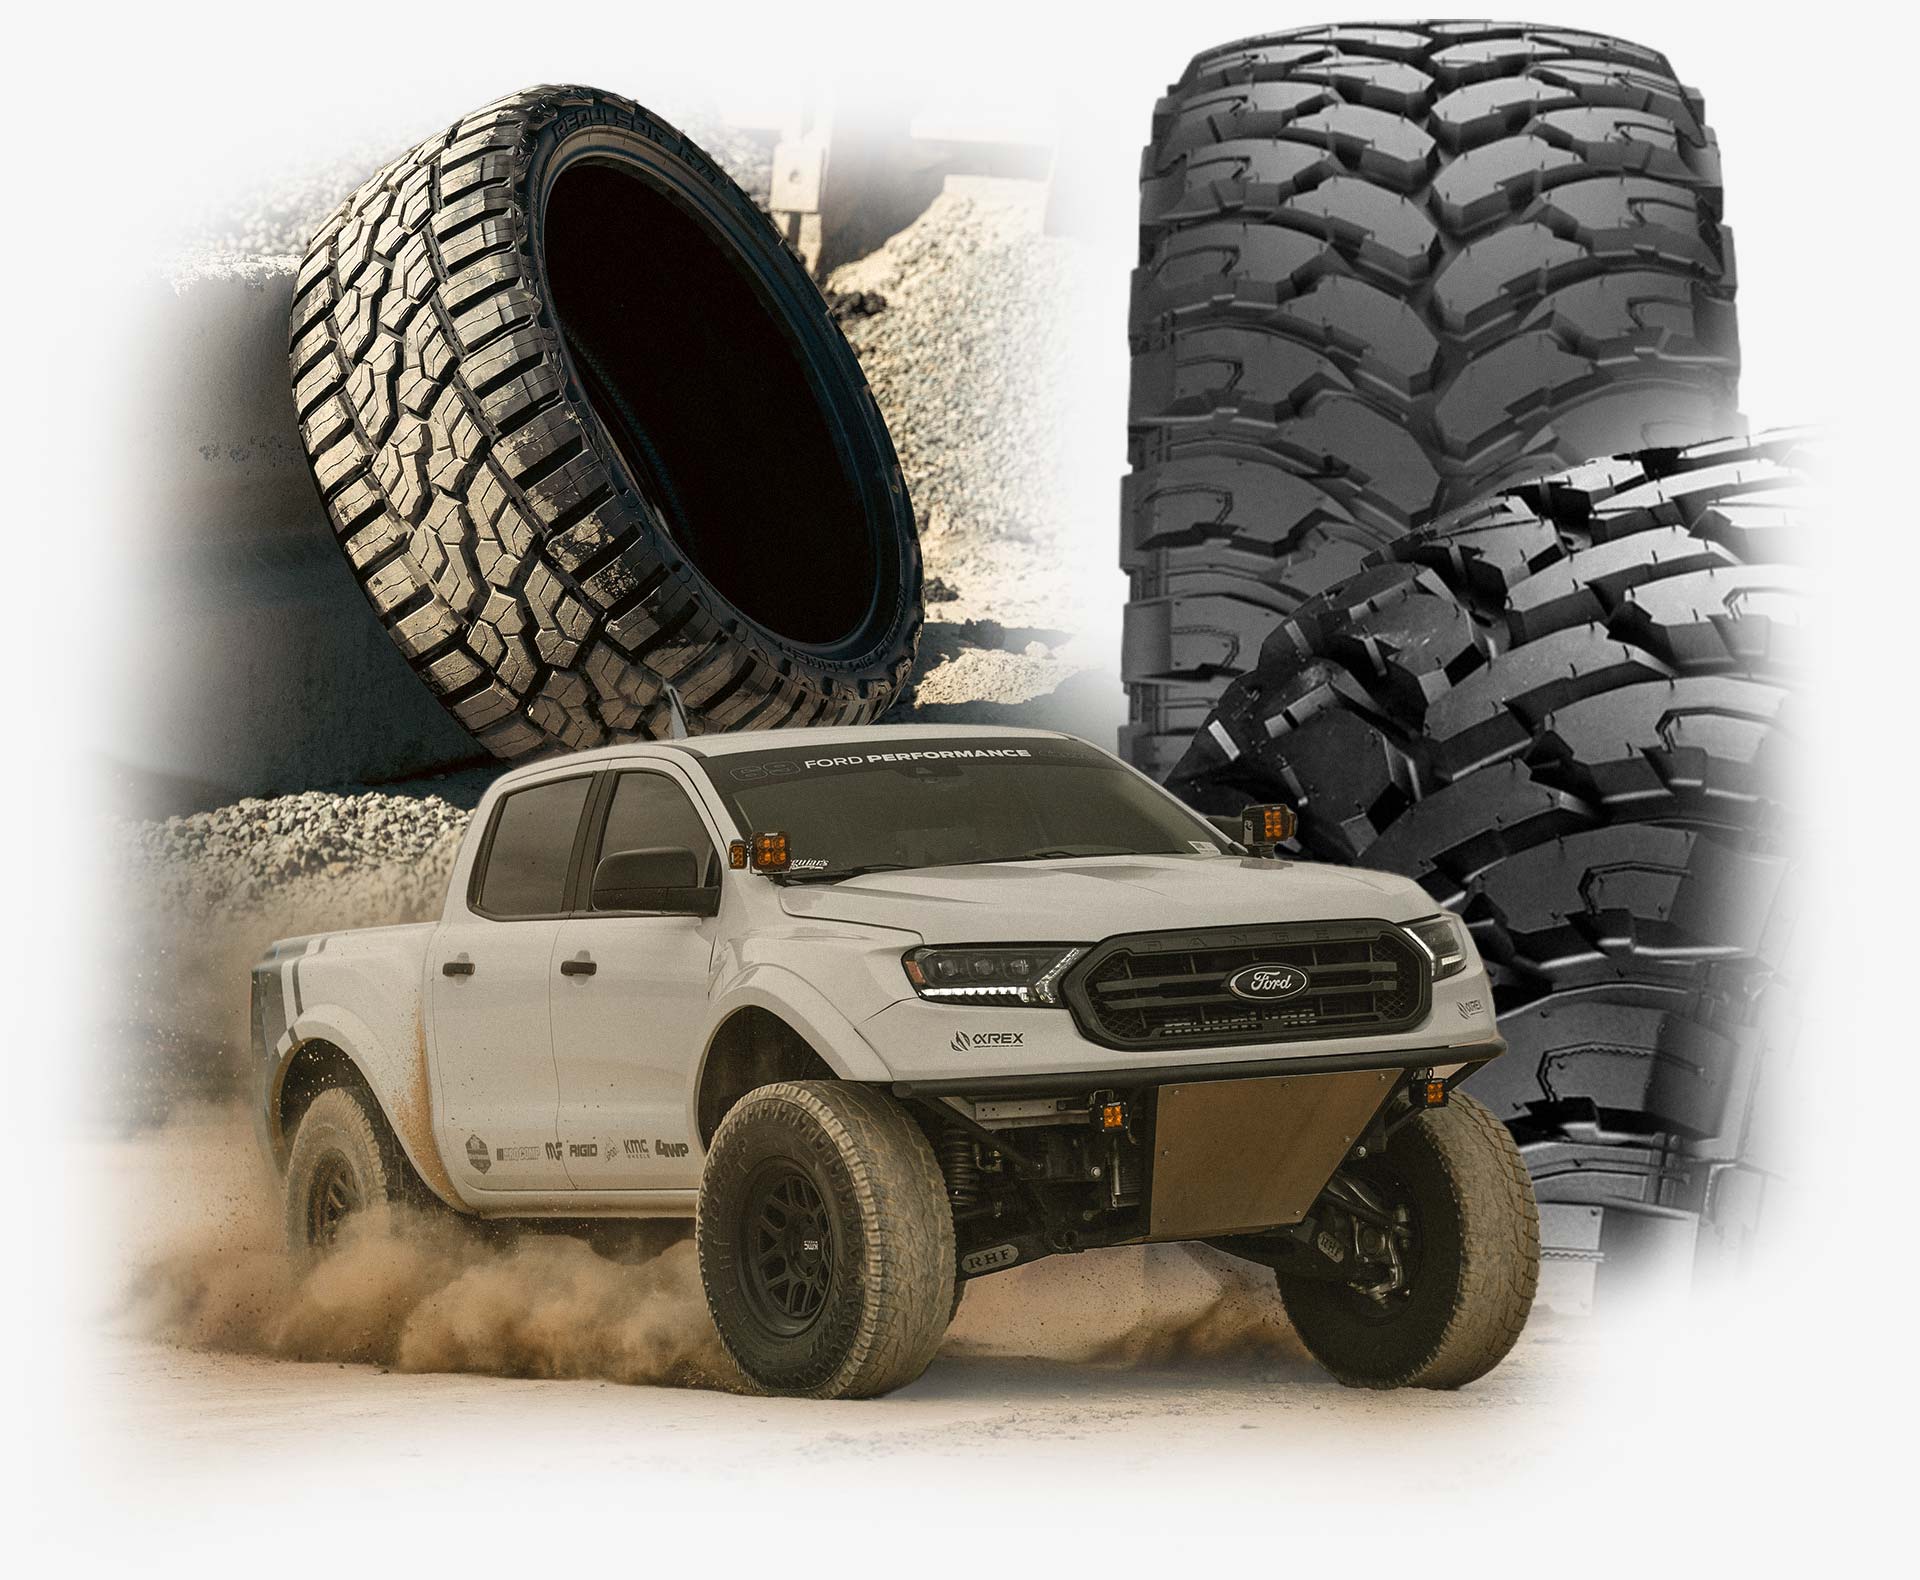 A graphic design image of RBP tires and a Ford Ranger